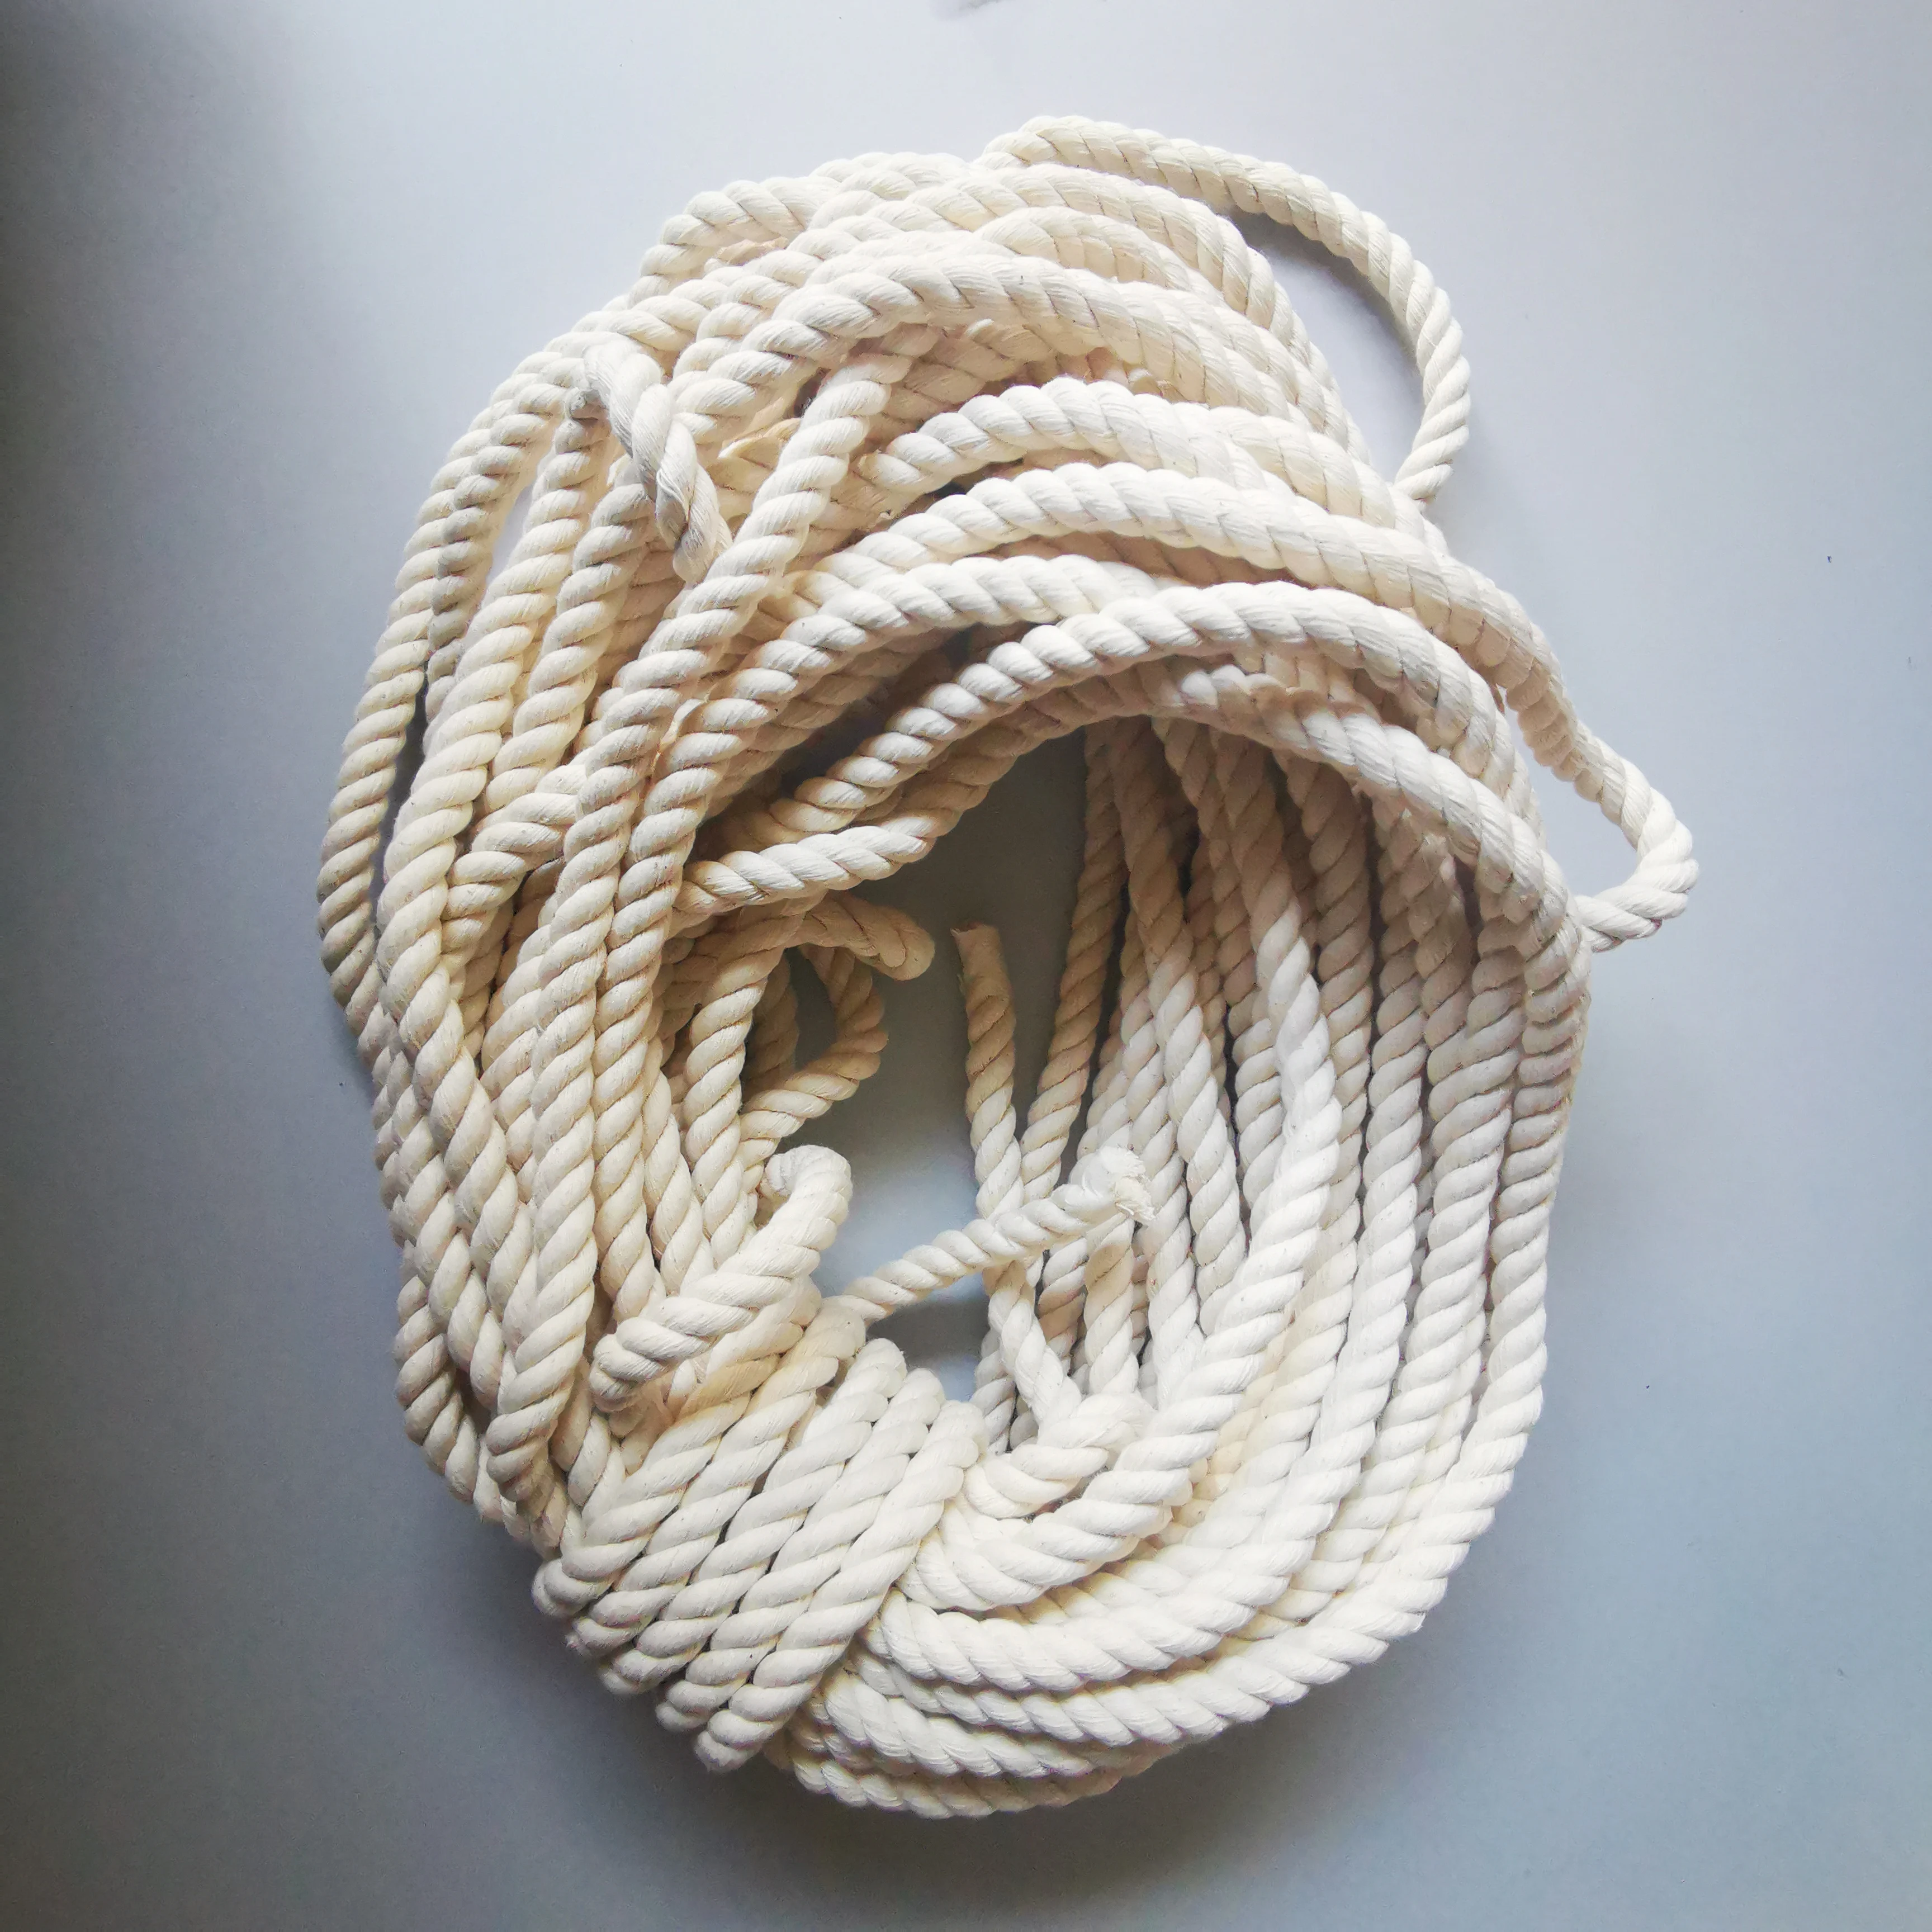 

6/8/9/10/12/15/18/20mm Natural White Cotton Rope- 3 Strands Twisted Cotton Cord for Macrame DIY Handmade Art Project